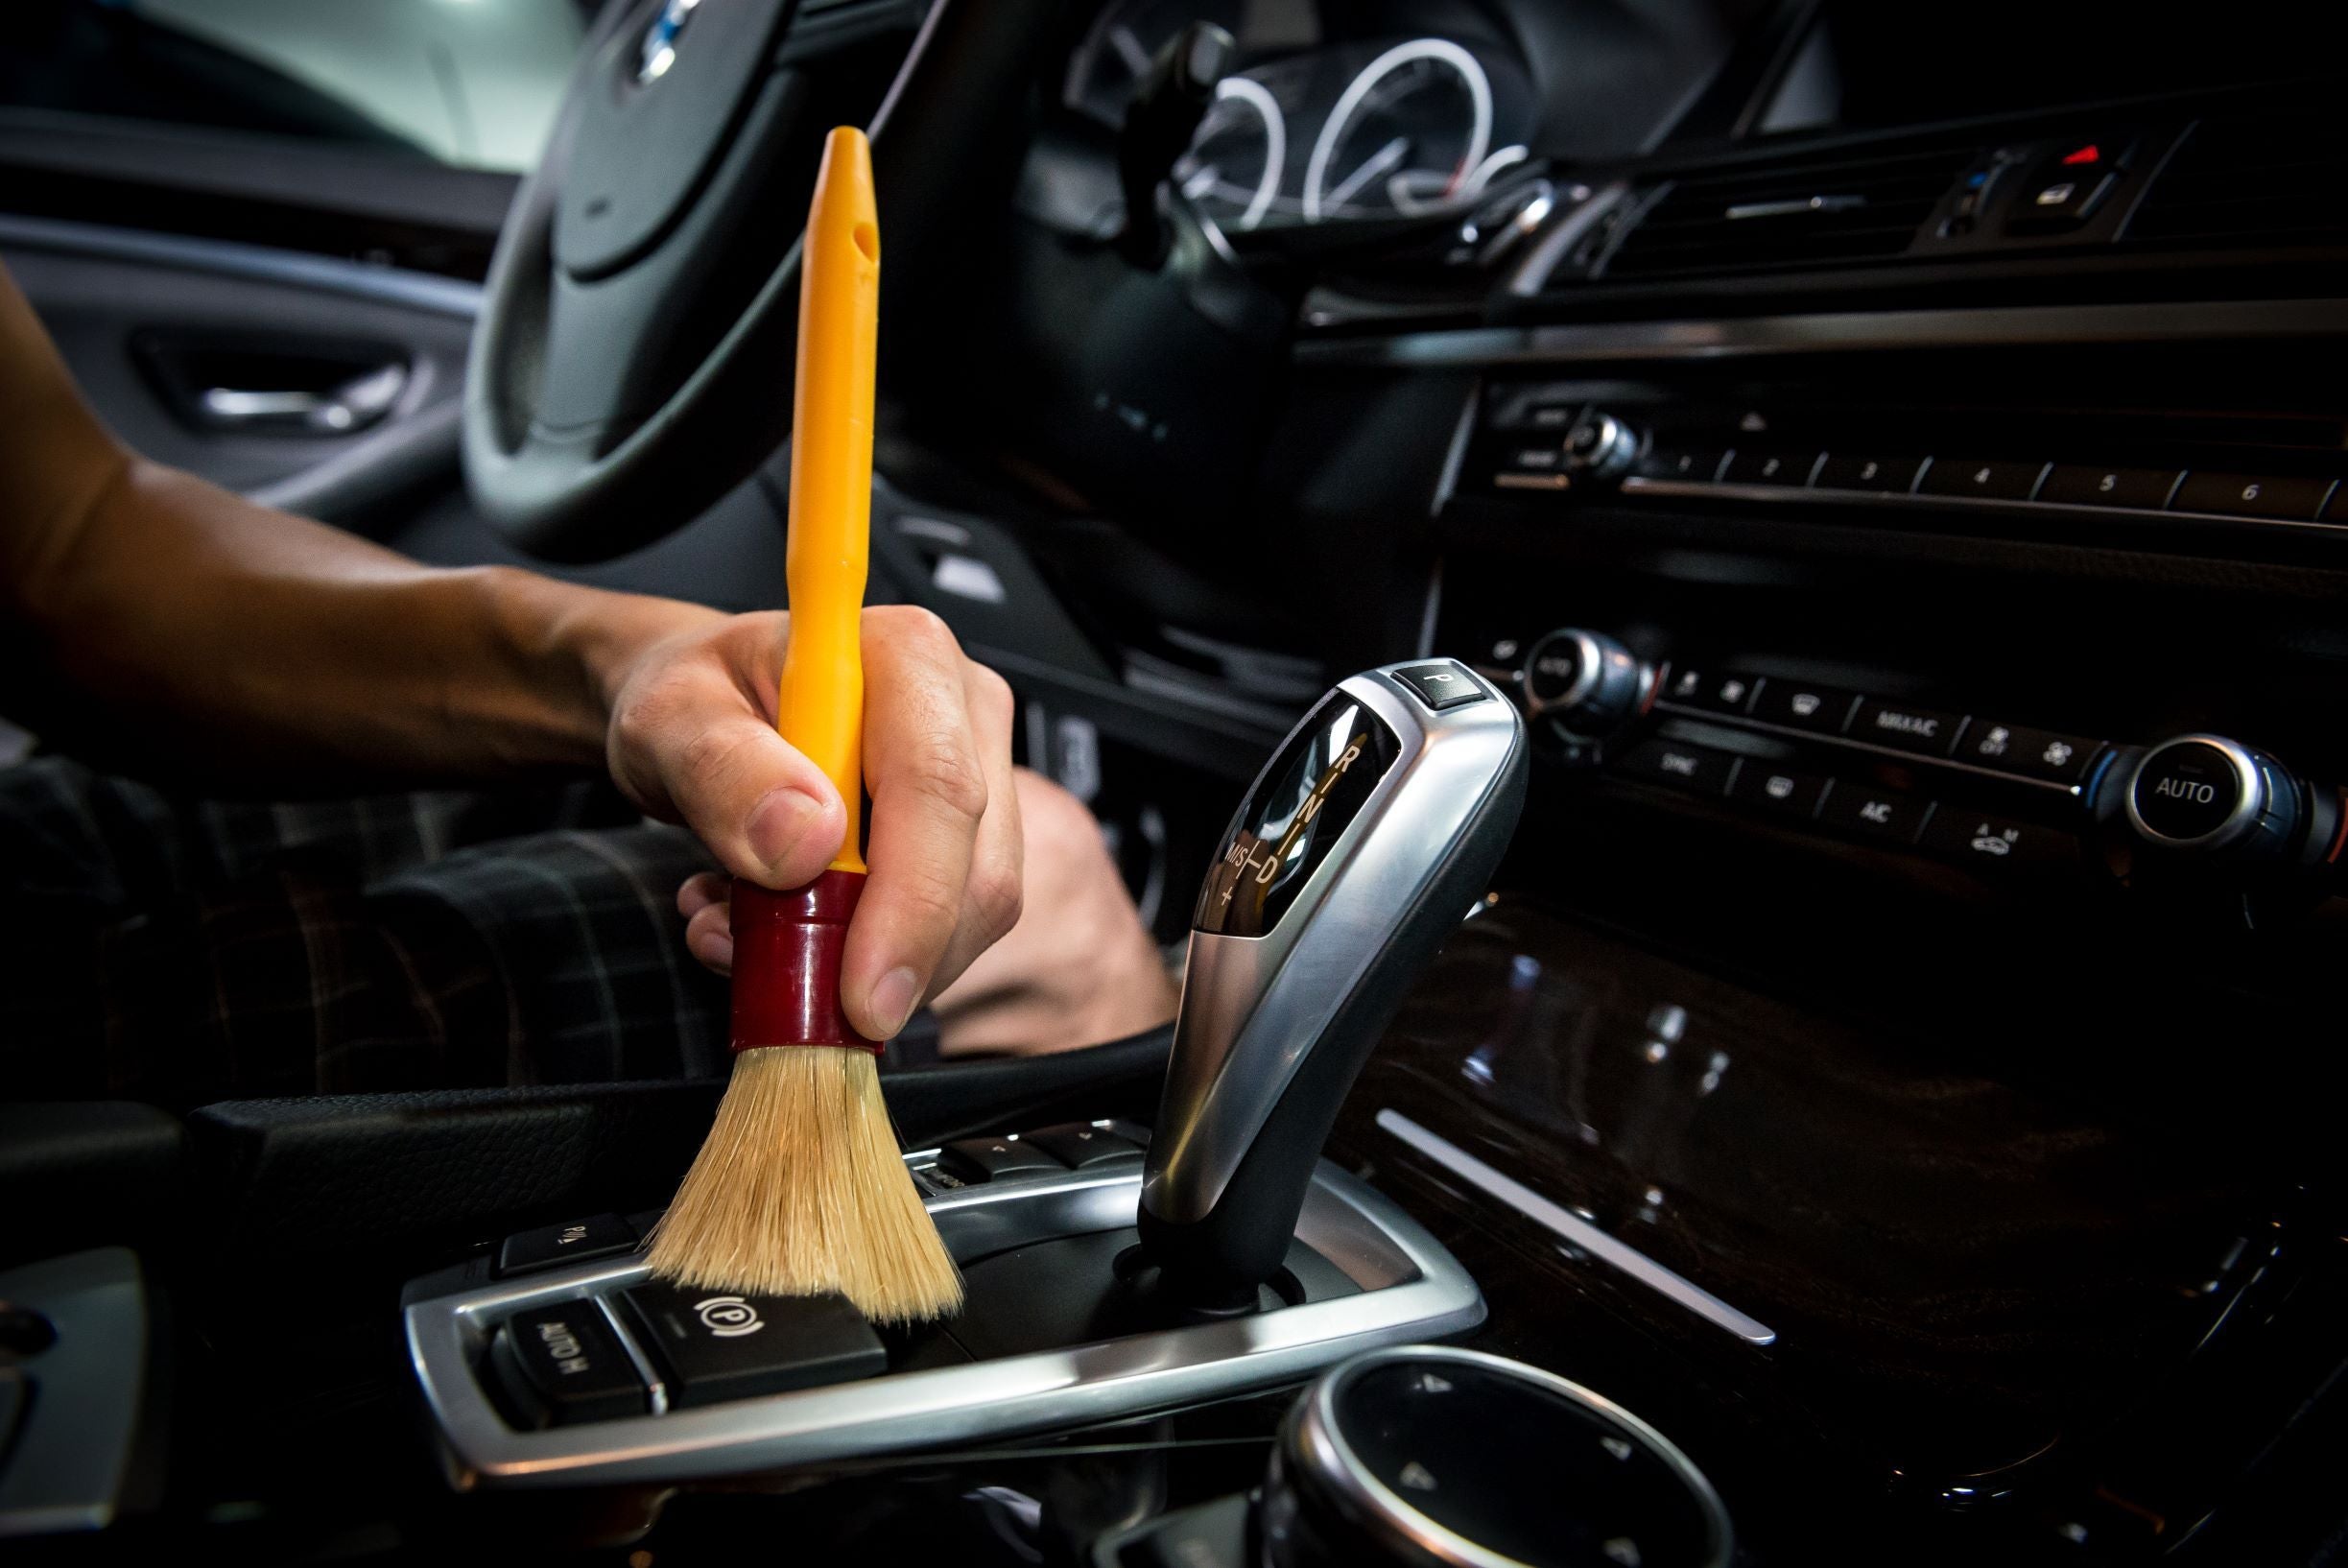 Leather Cleaner Car Cleaning Wipes for Leather, Vinyl, and Faux Leather